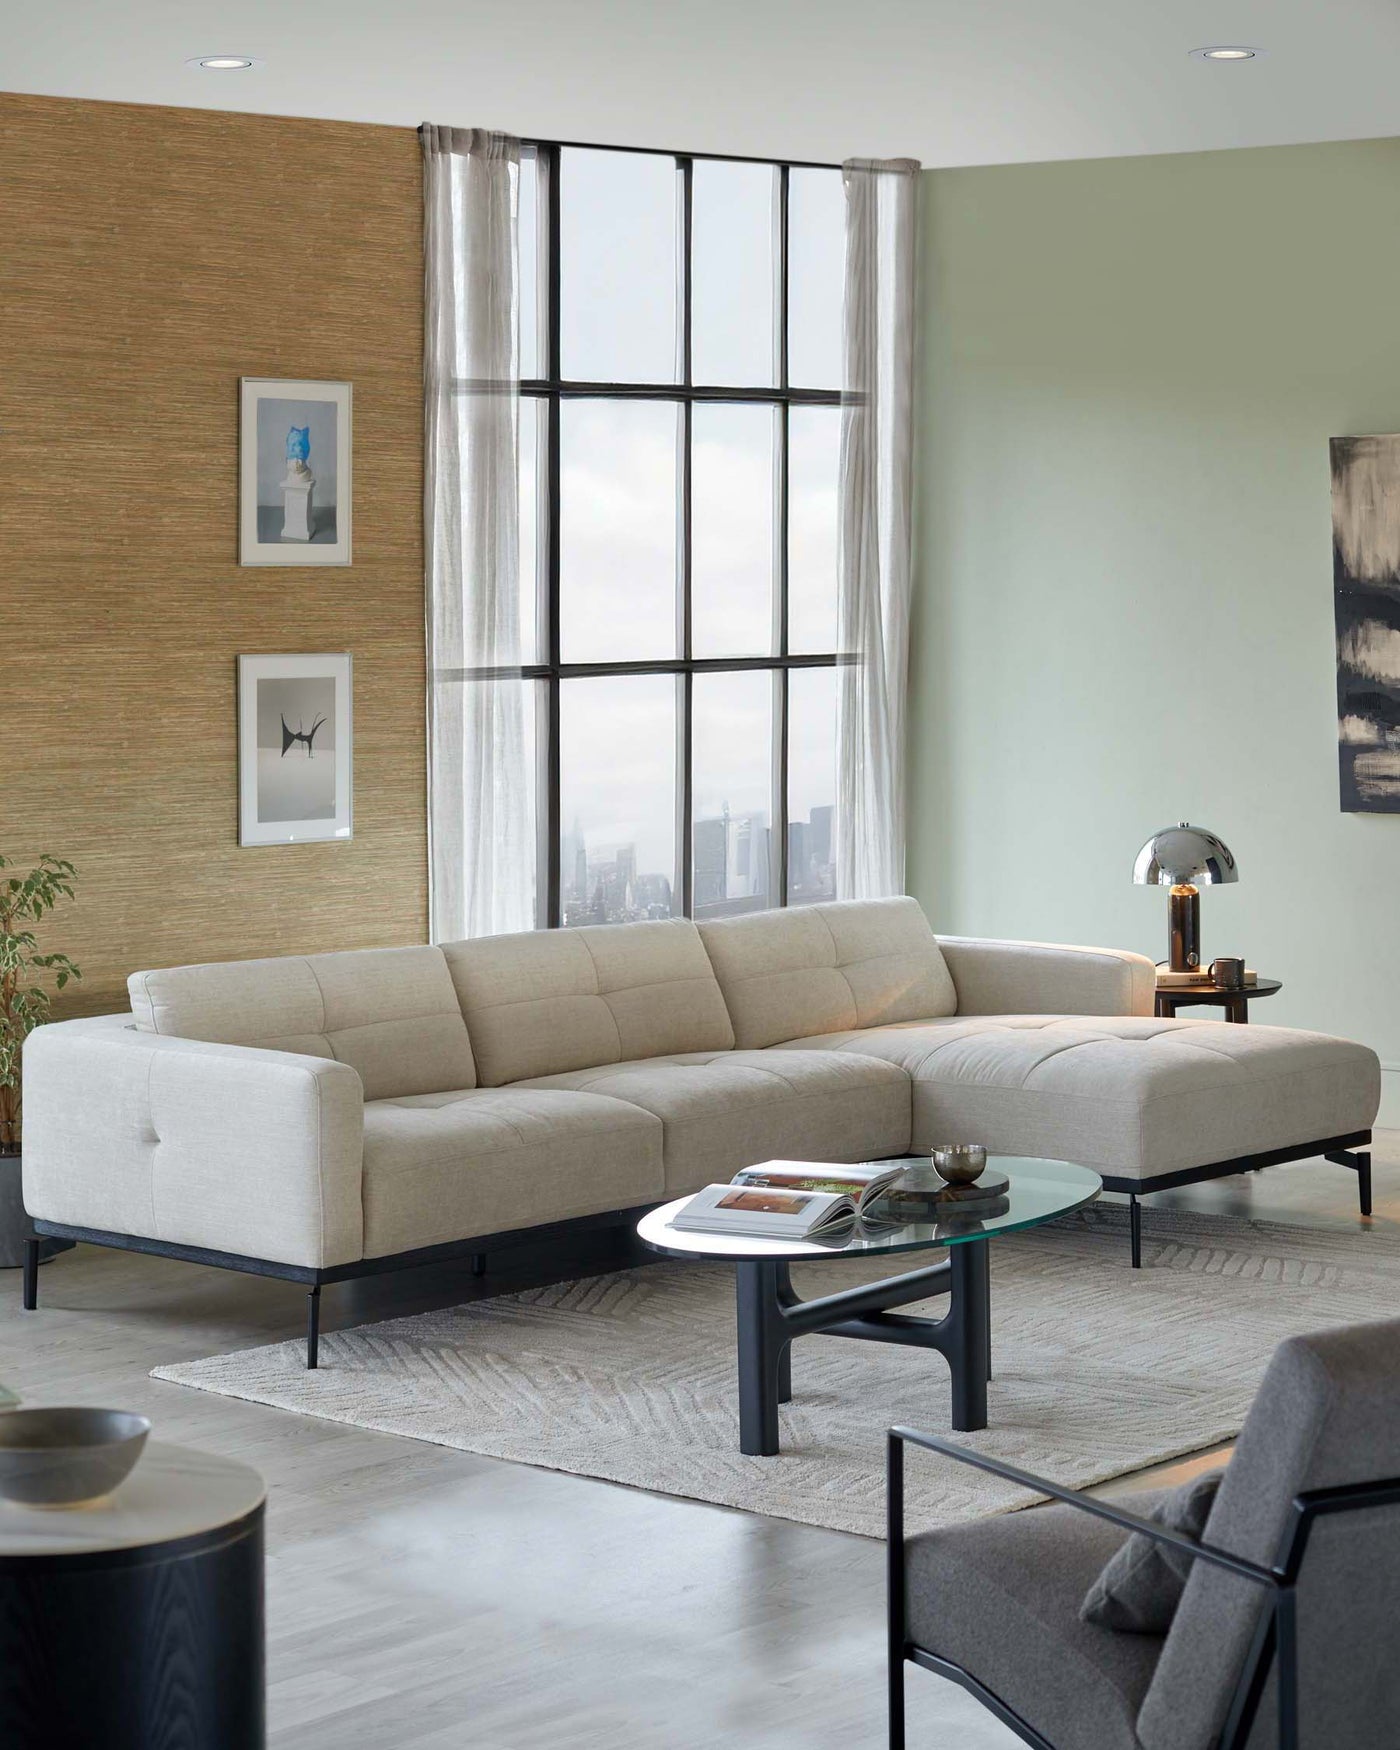 Modern beige L-shaped sectional sofa with clean lines and black metal legs, paired with an oval glass-top coffee table with a unique black base. A sleek, black floor lamp adds a touch of elegance to the space.